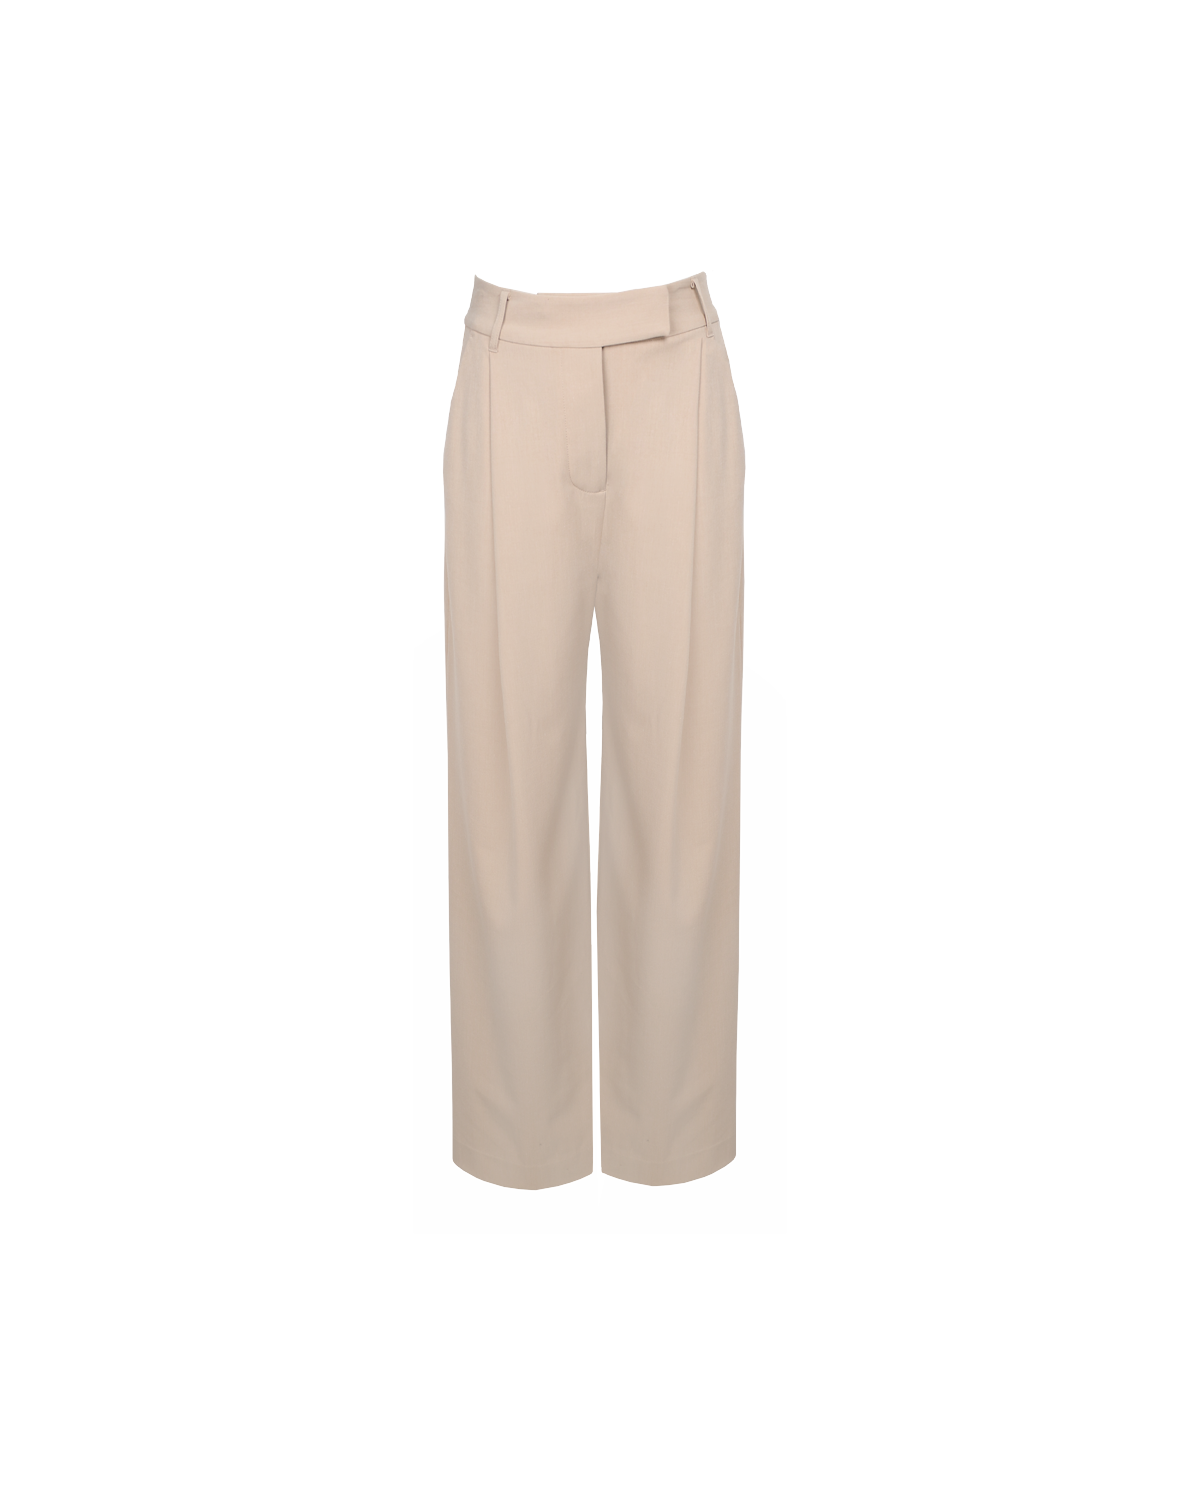 Slim Fit Camel Stripe Trousers | Buy Online at Moss